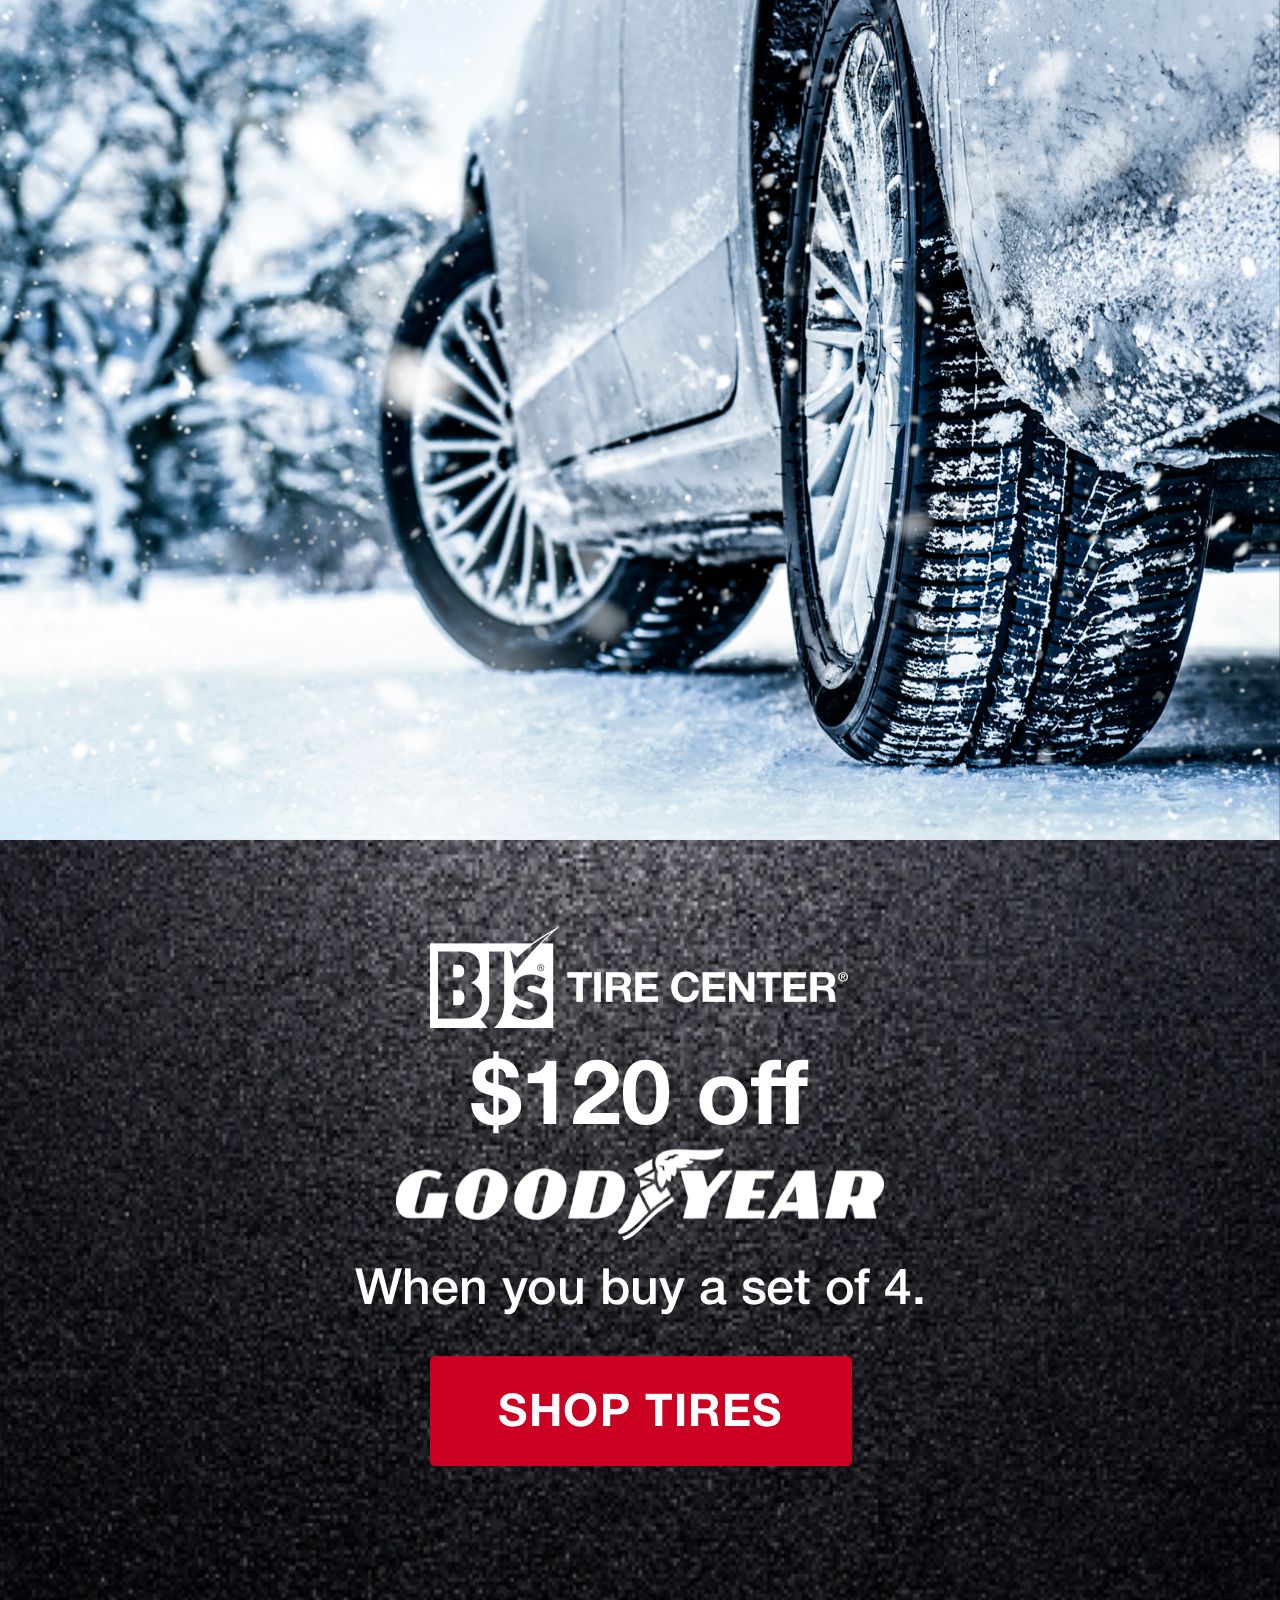 BJ's Tire center. $120 off GoodYear when you buy a set of 4. Click to shop tires.